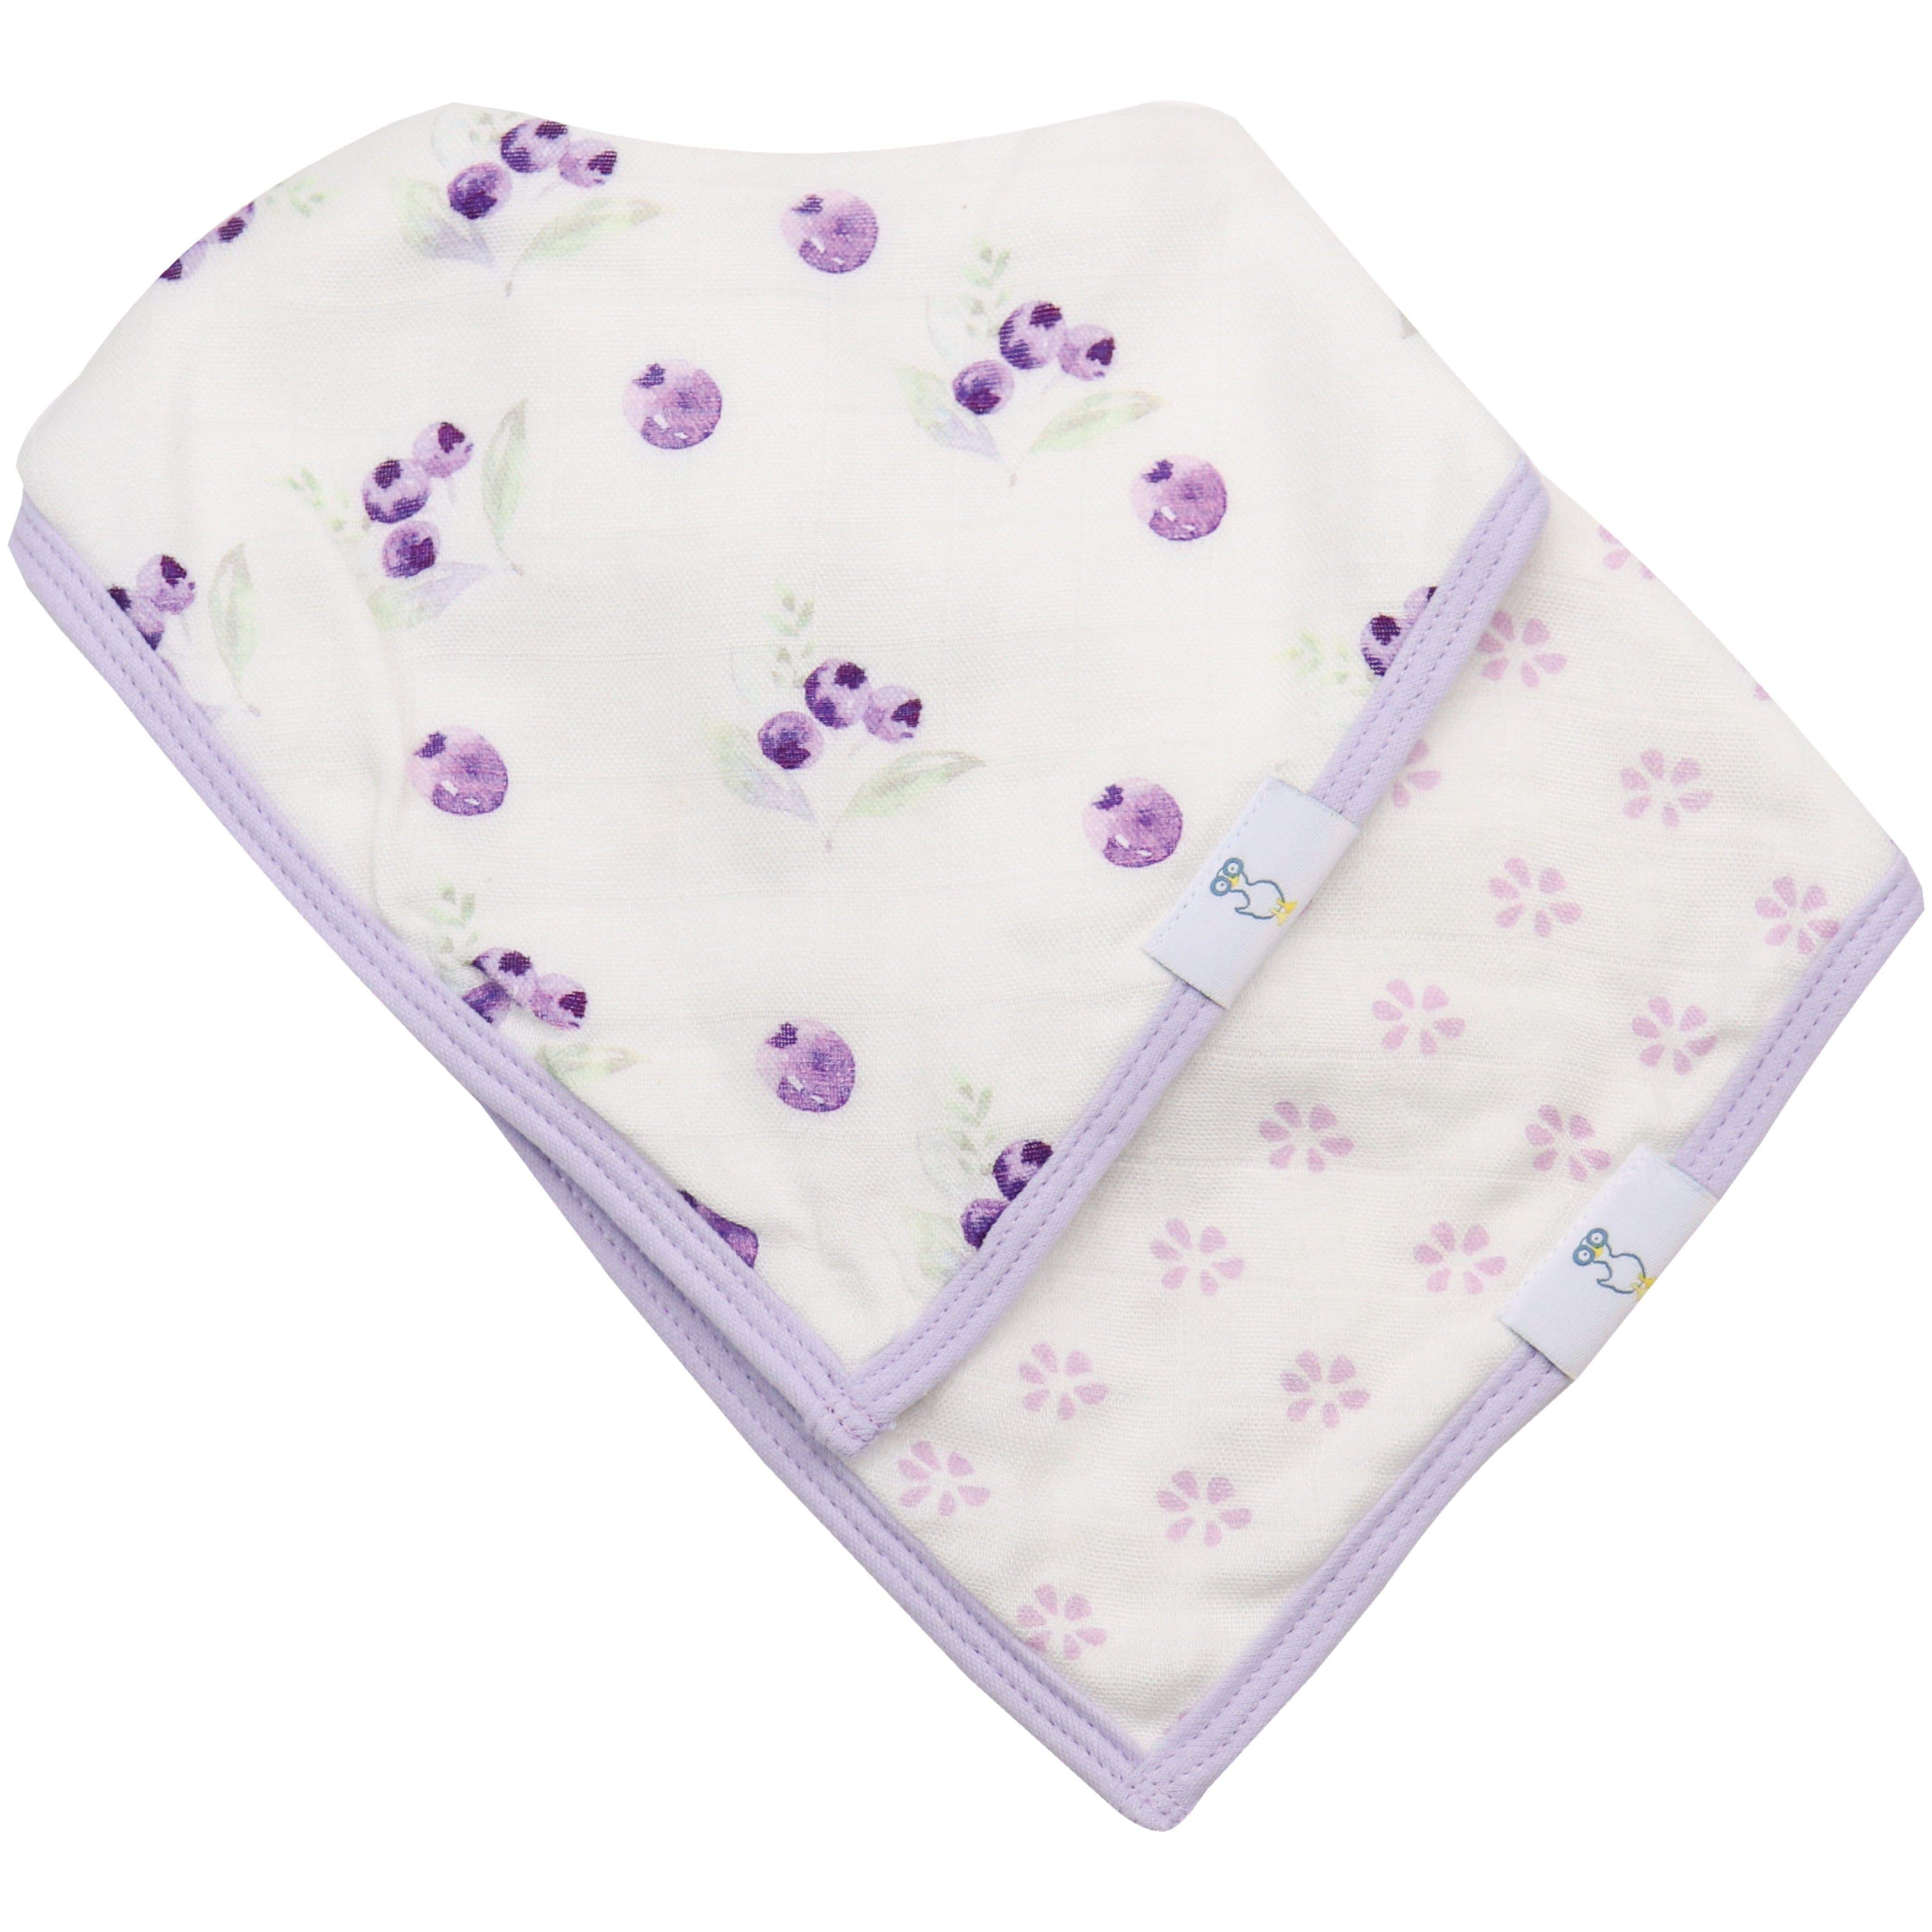 Blueberries And Flowers Lavender2 Pack Muslin & Terry Cloth Bib Set